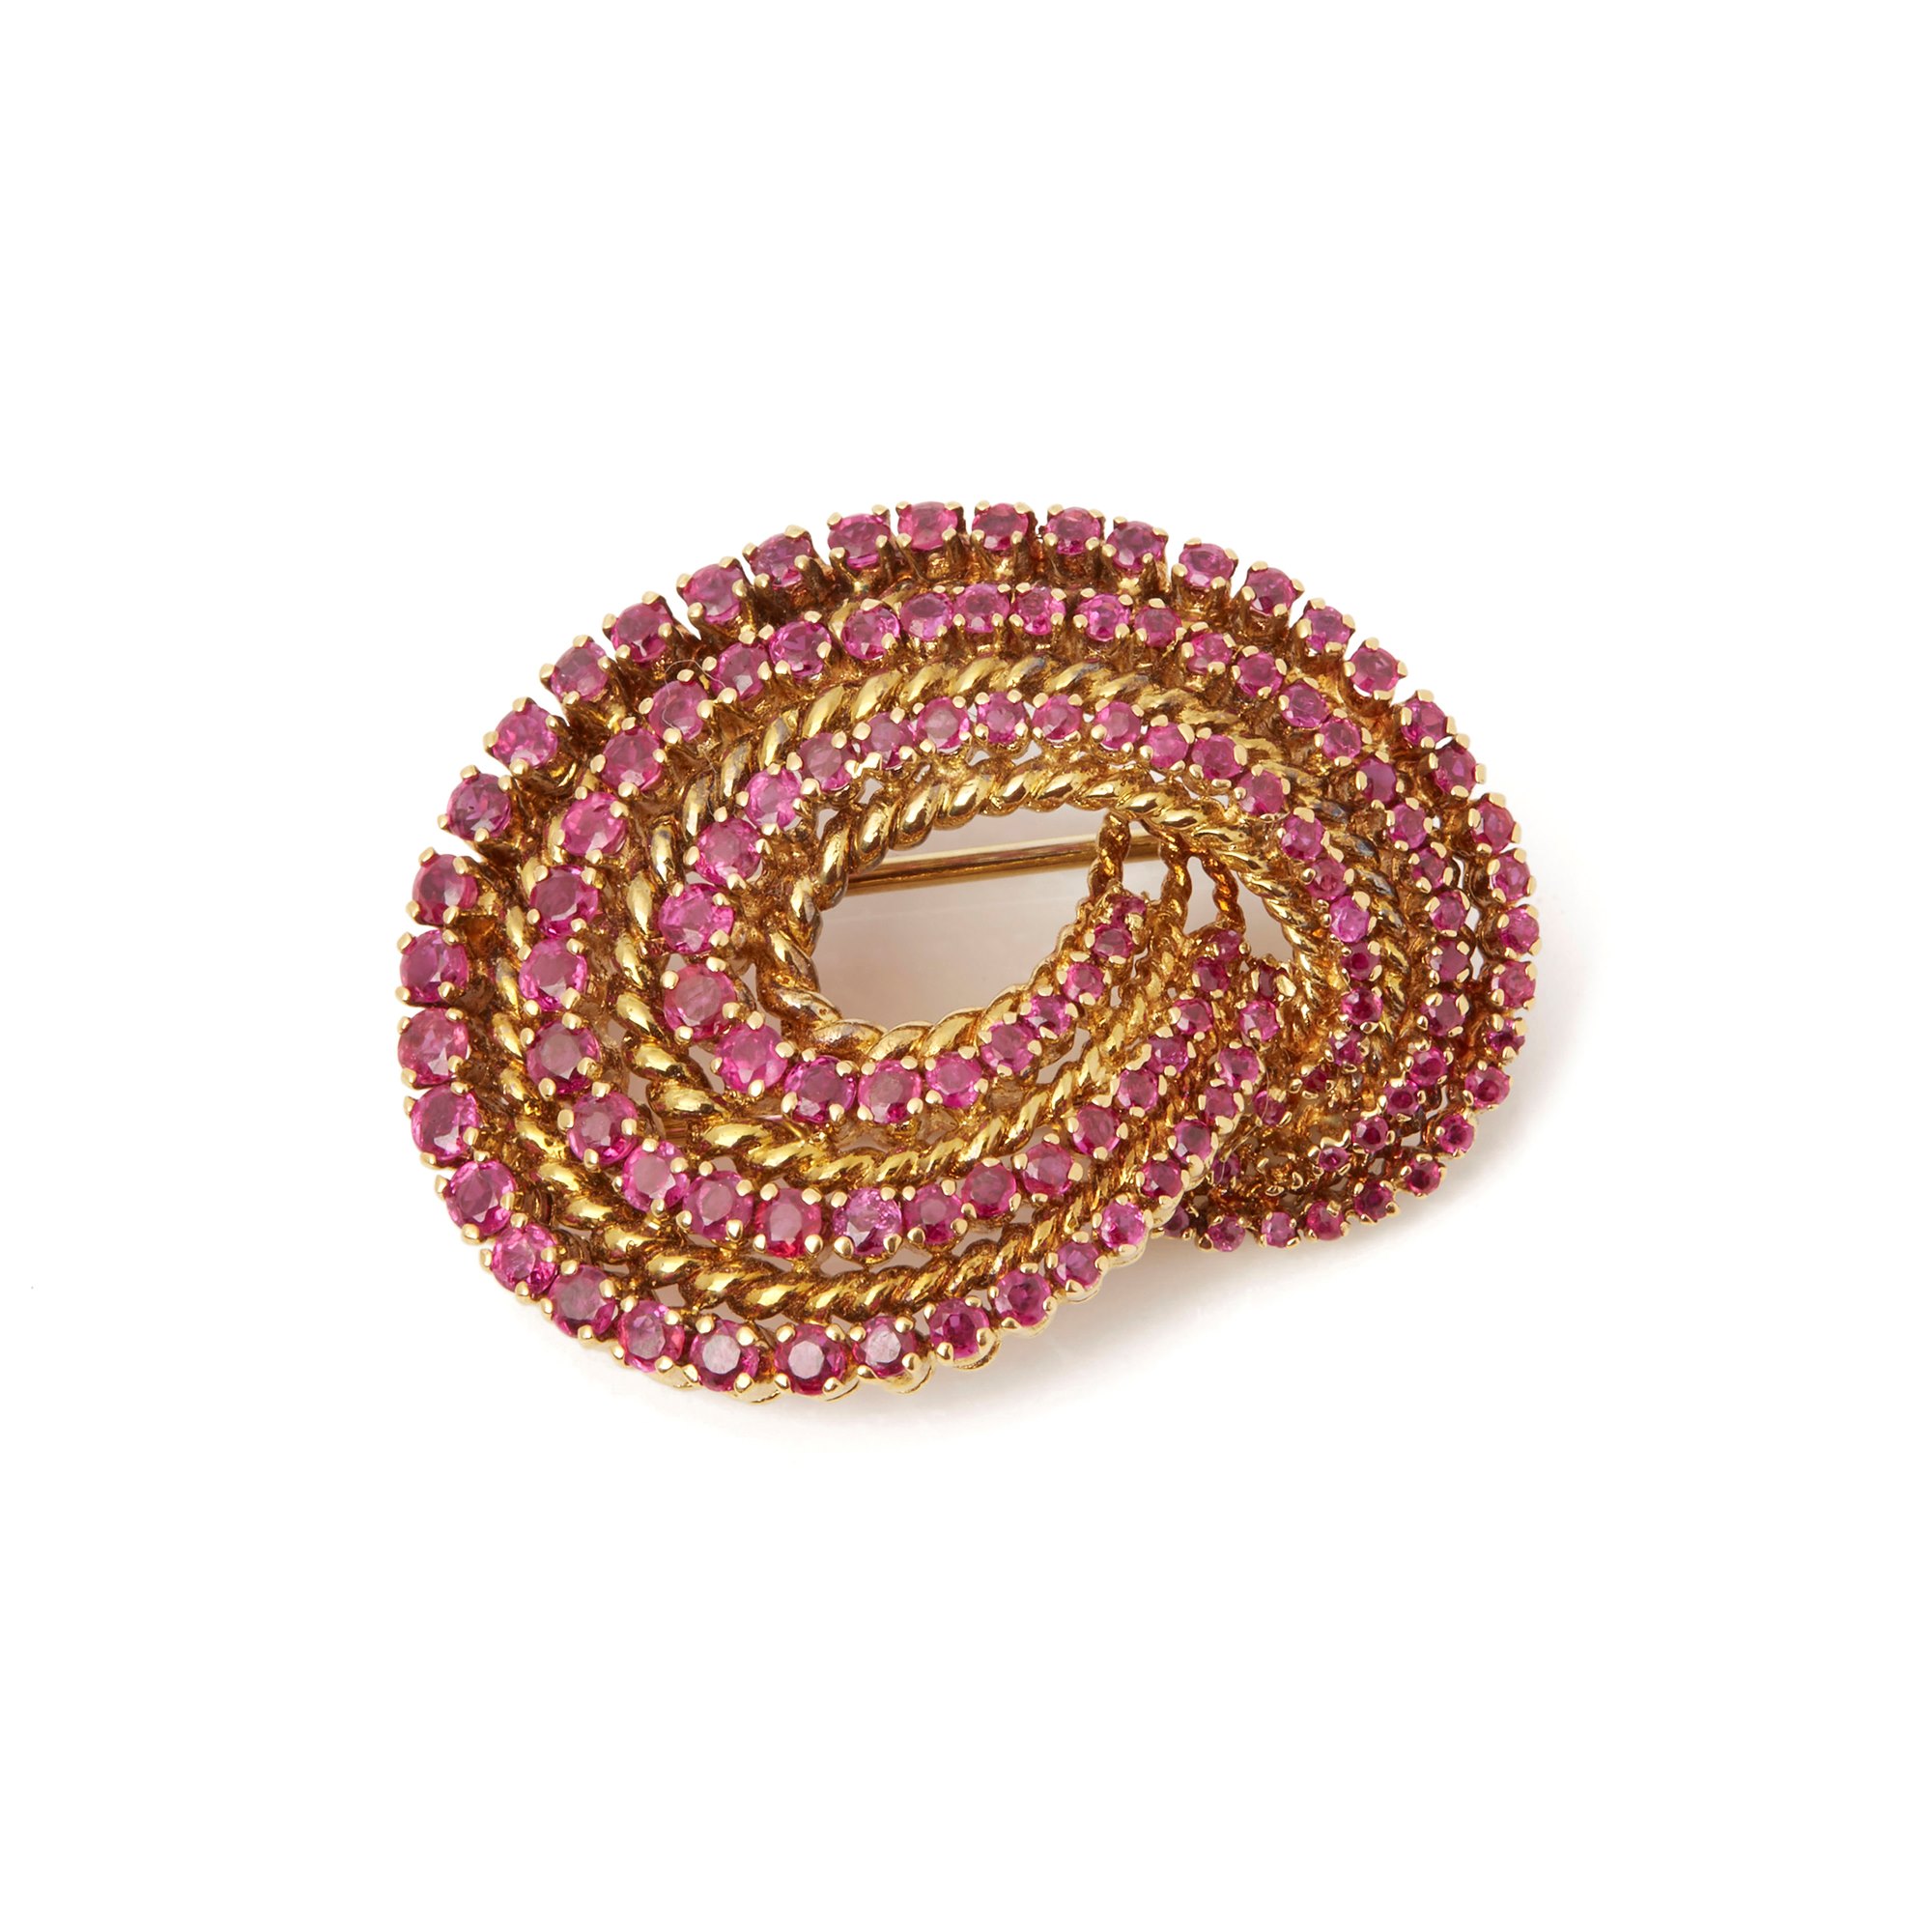 Tiffany & Co. 18k Yellow Gold Ruby 1940's Vintage Brooch